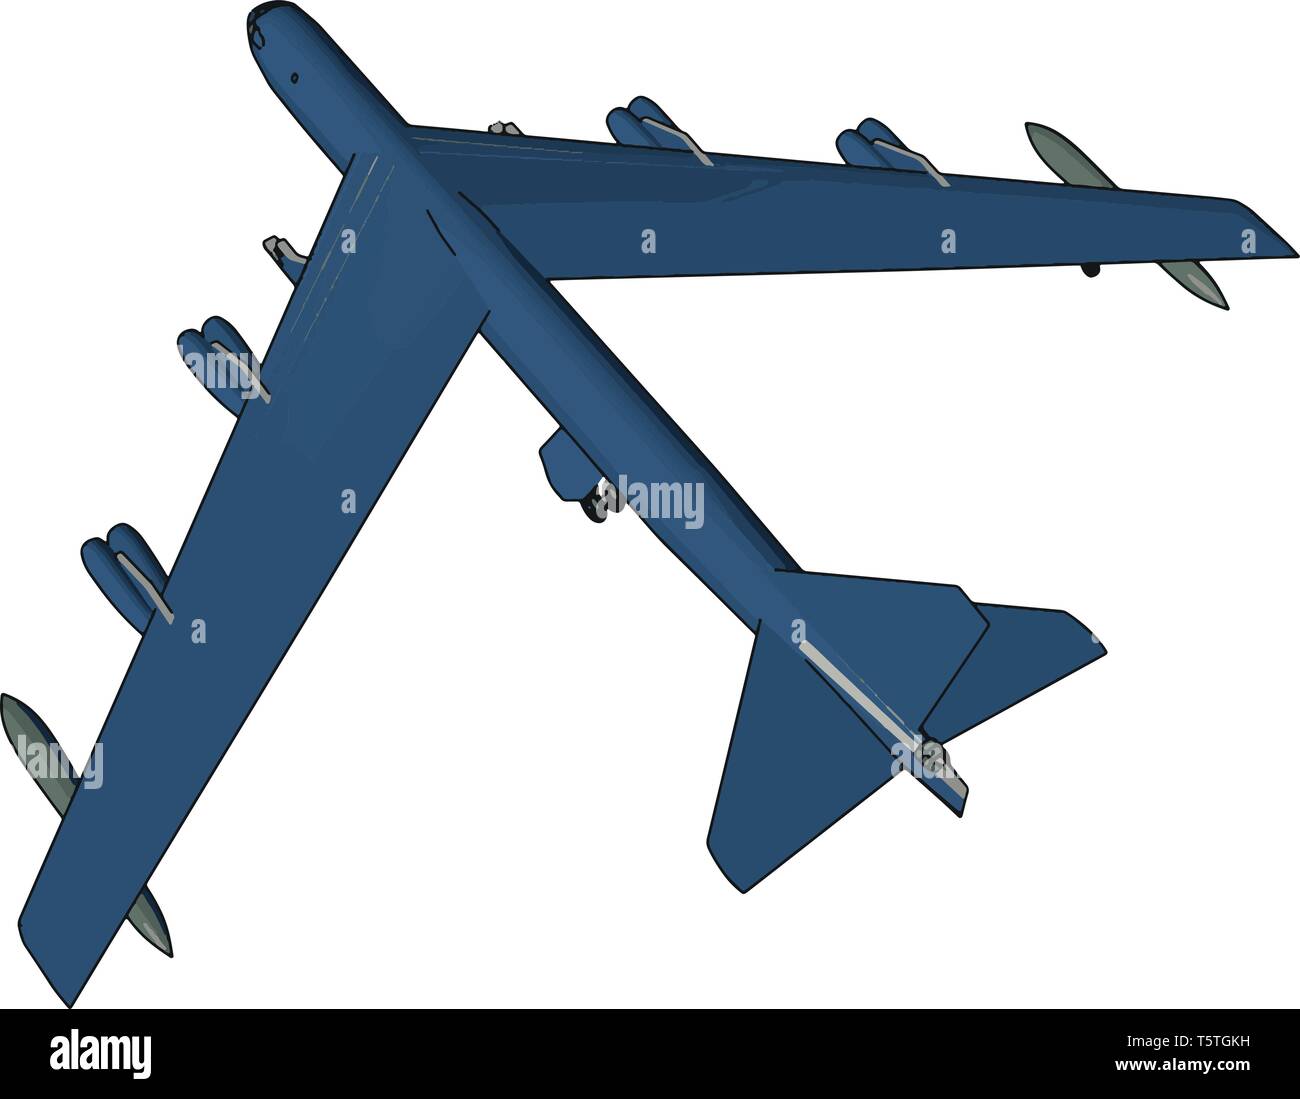 Blue millitary airplane with missiles vector illustration on white background Stock Vector